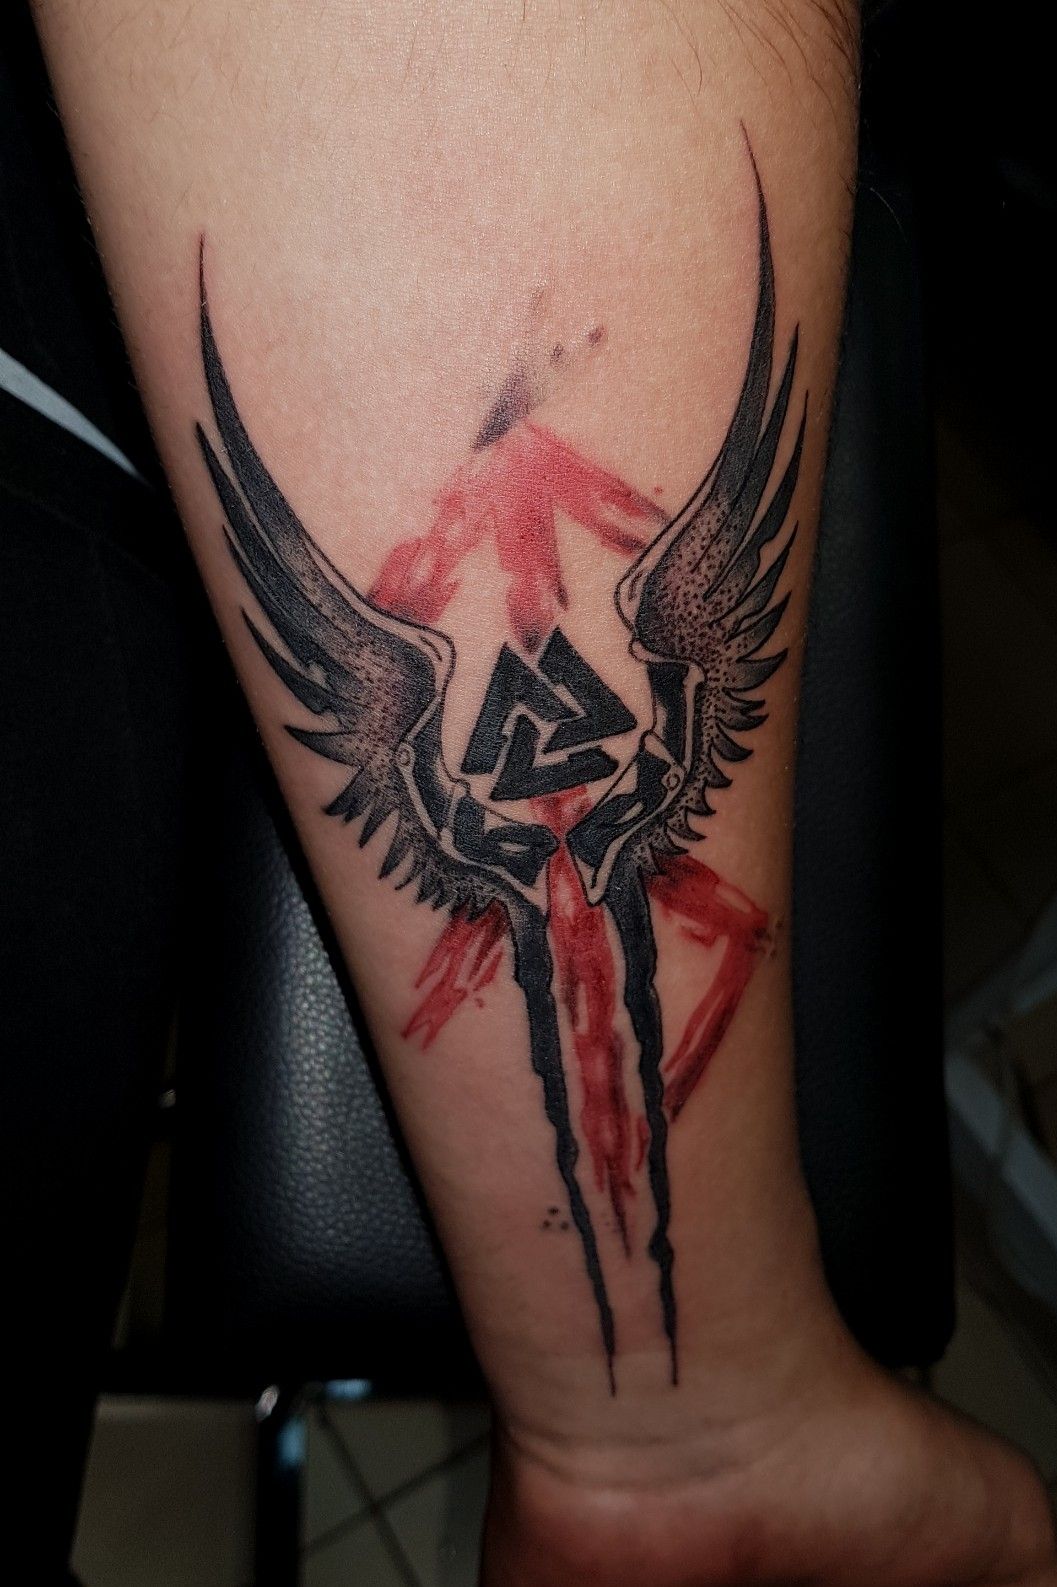 Tattoo uploaded by Tiago Henrique Silva Silva • Viking symbol with wings My  work • Tattoodo